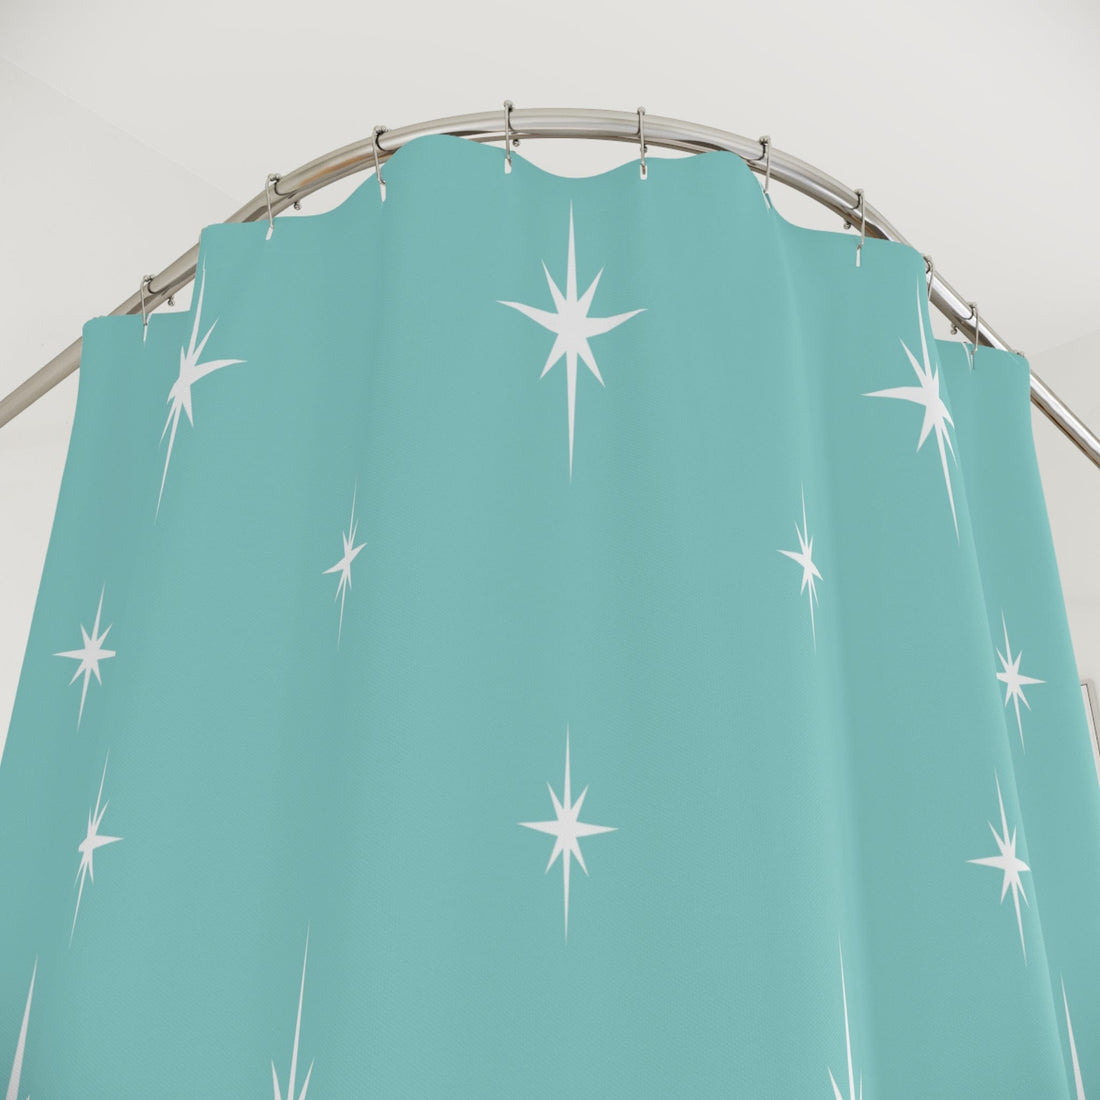 Kate McEnroe New York 50s Retro Mid Century Modern Atomic Starburst Shower Curtains in Vintage Turquoise and WhiteShower CurtainsS40 - STB - BLU - 7X7